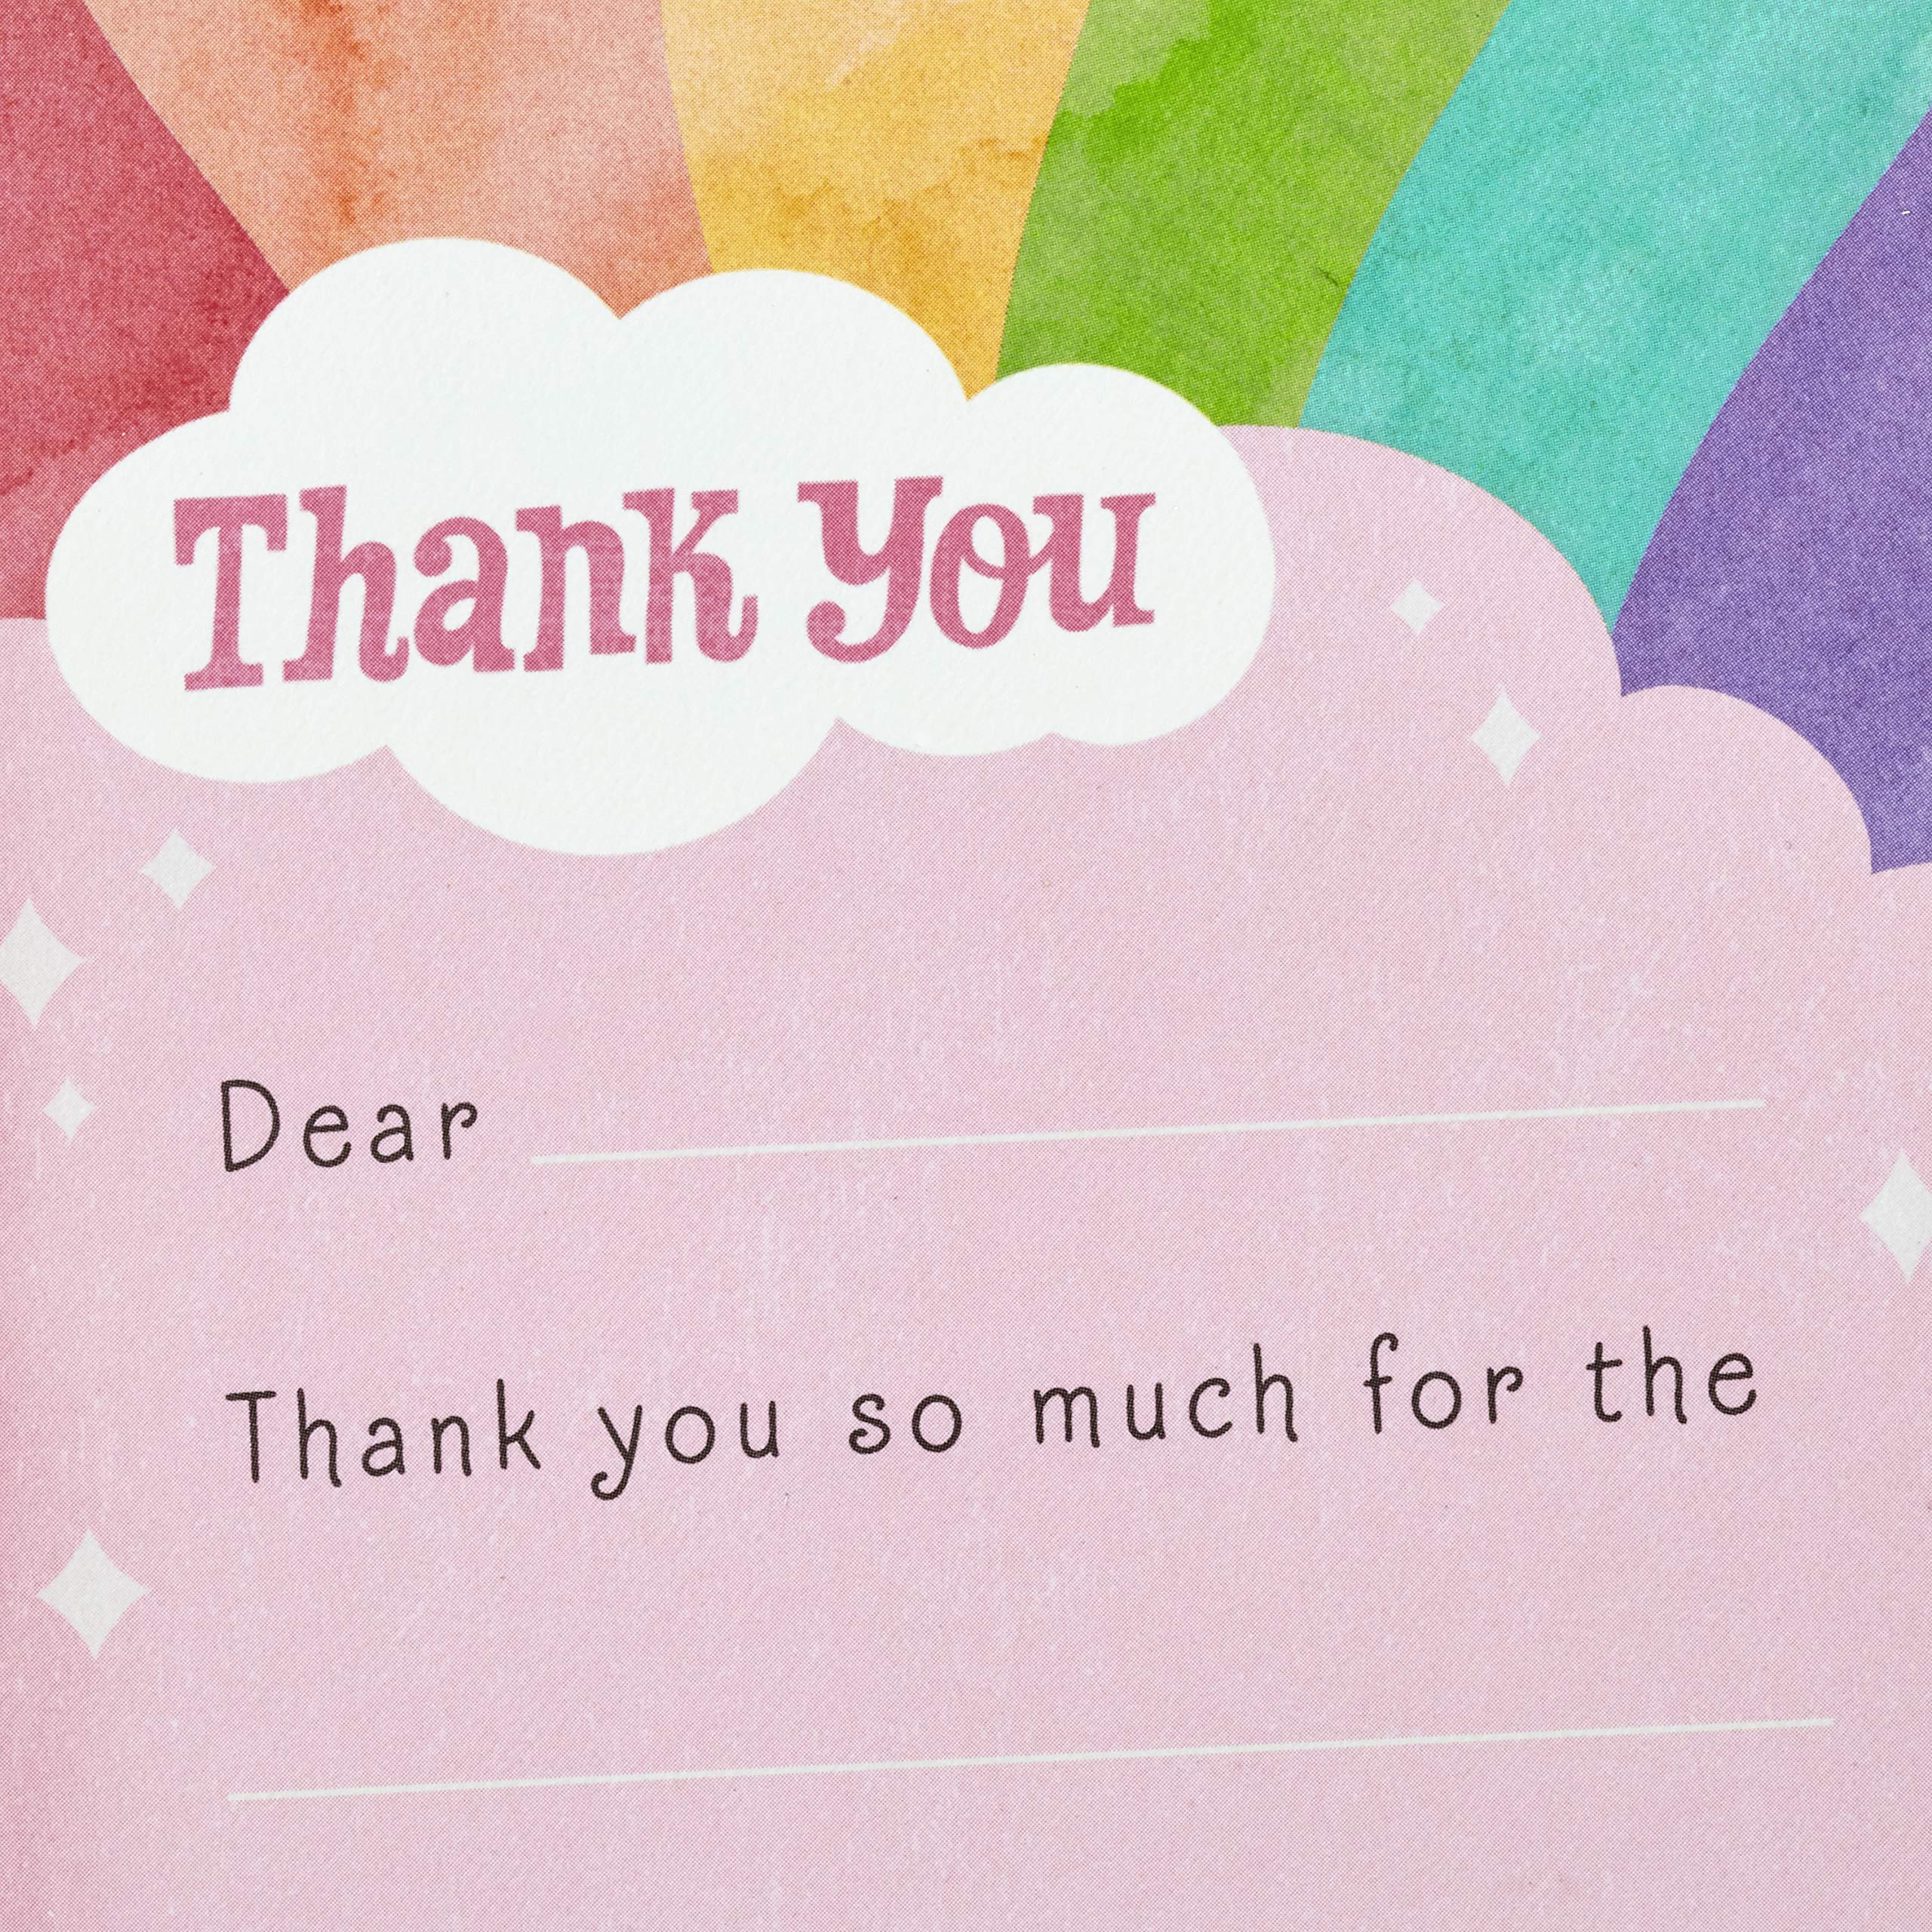 Hallmark Kids Fill in the Blank Thank You Cards, Rainbow (20 Cards with Envelopes)